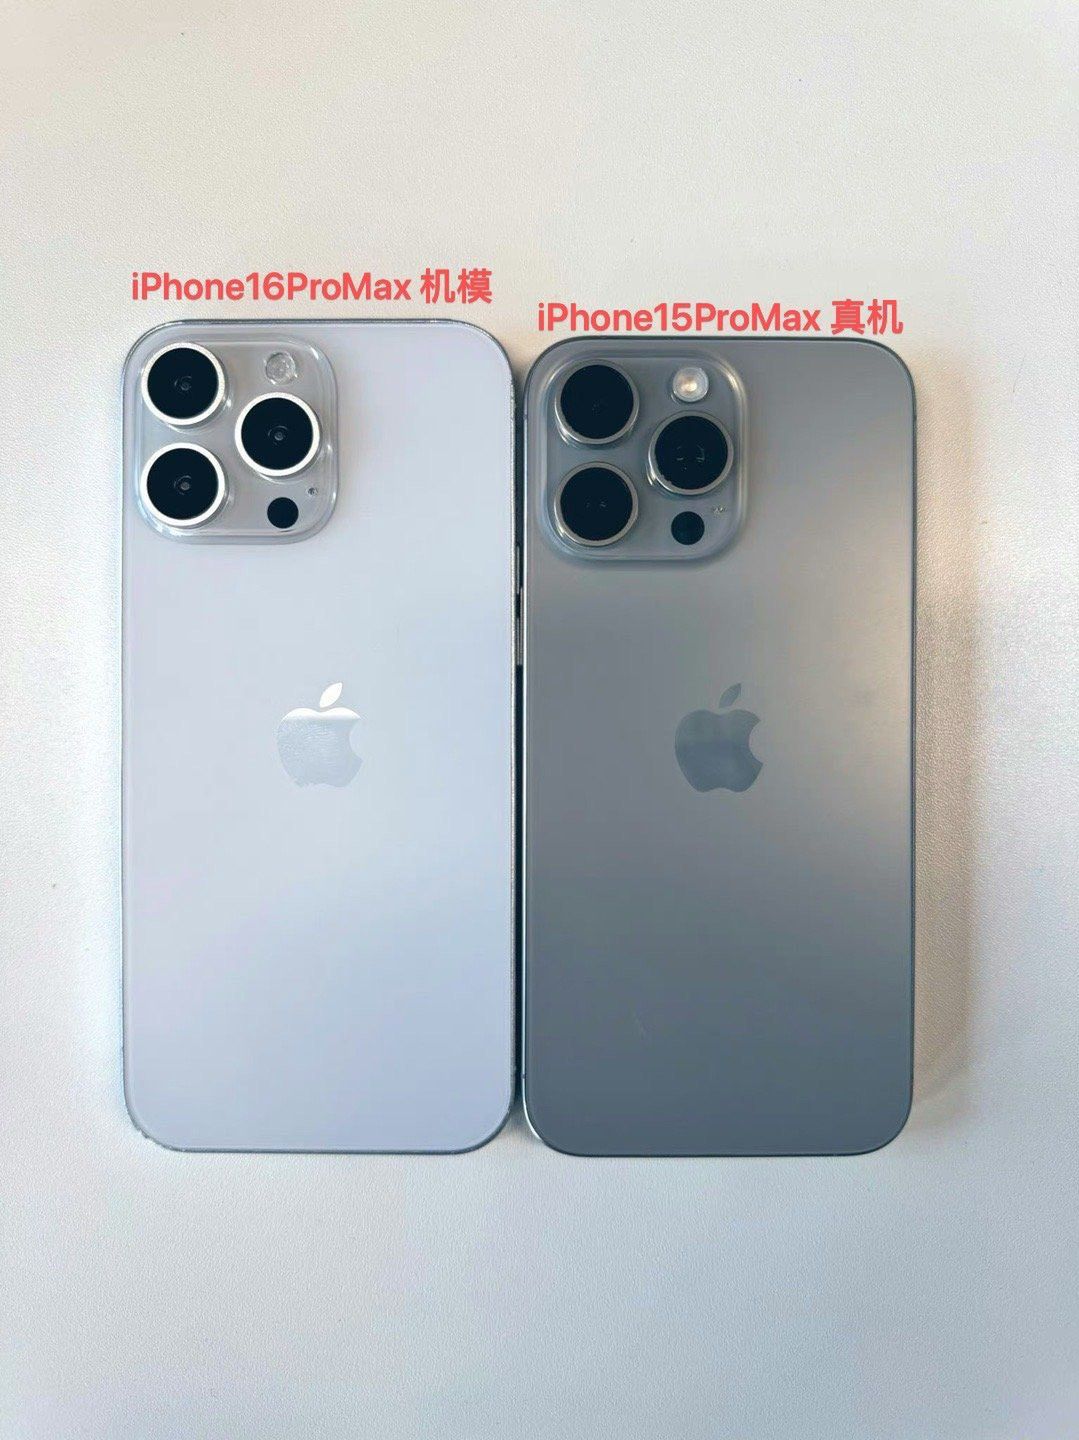 Comparison of iPhone 16 and iPhone 15